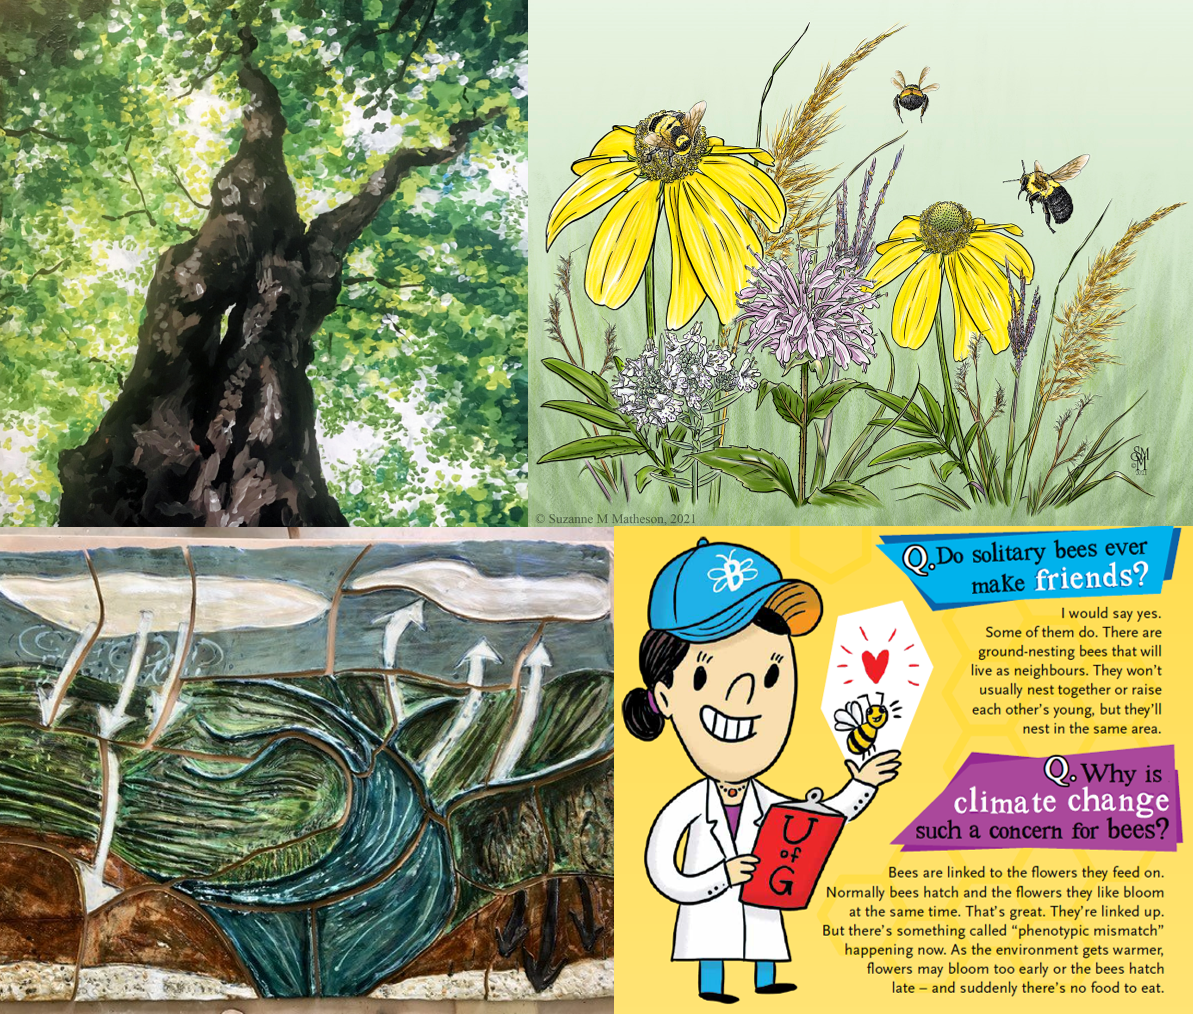 Four images. Top left shows painting of a tree. Top right shows illustrations of flowers and bees. Bottom left shows a clay piece that represents a watershed. Bottom right shows colourful school material on solitary bees.